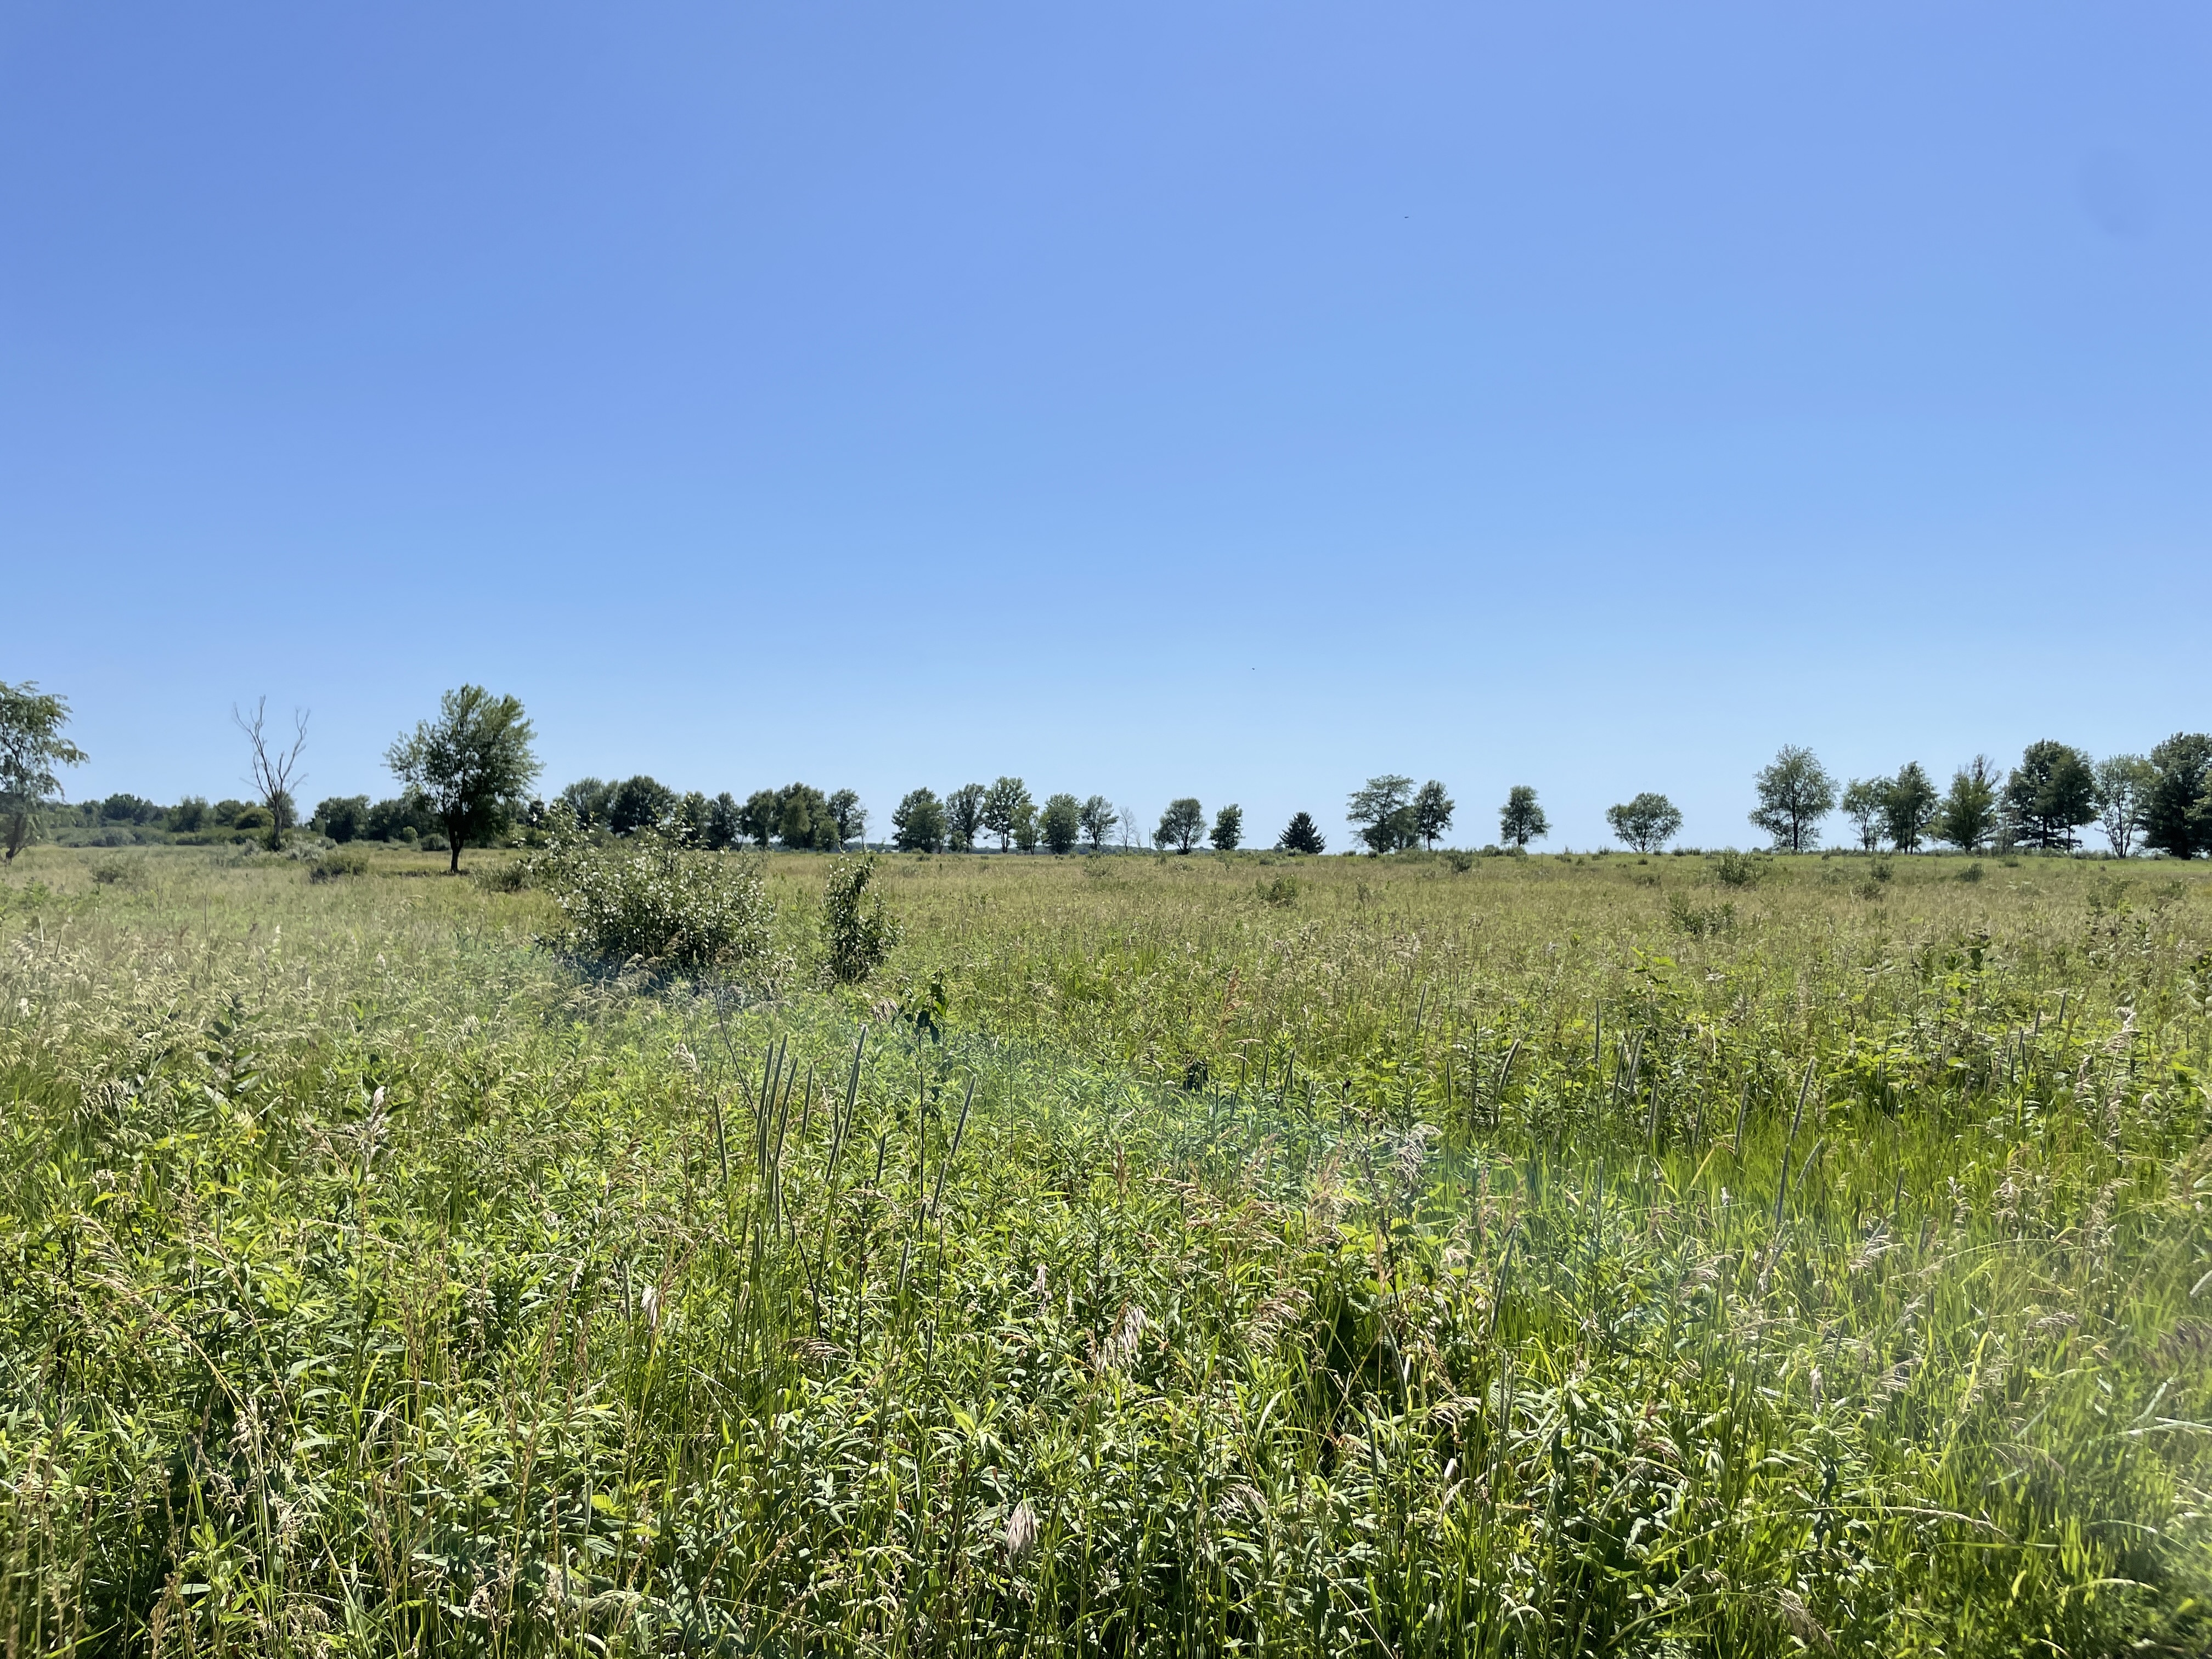 Photo of the prairie with small, scattered trees and a big open blue sky in the background. Main colors are greens and blues.